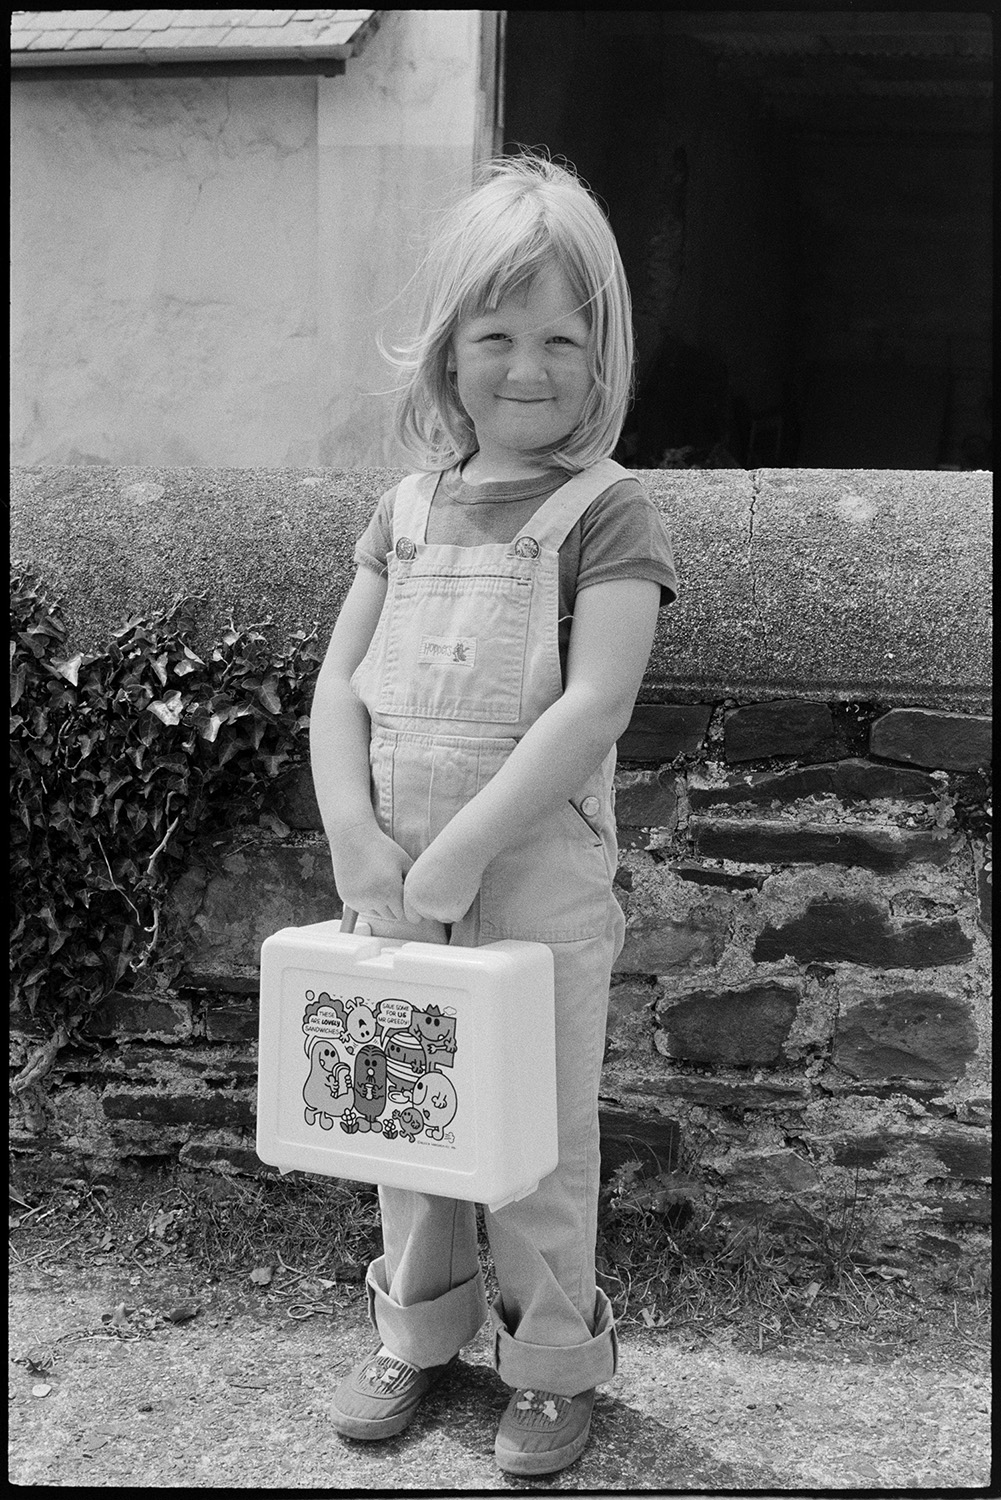 Little girl standing with lunch box.
[Sara Wright standing in a street in Dolton holding a plastic lunch box, decorated with Mr Men characters.]